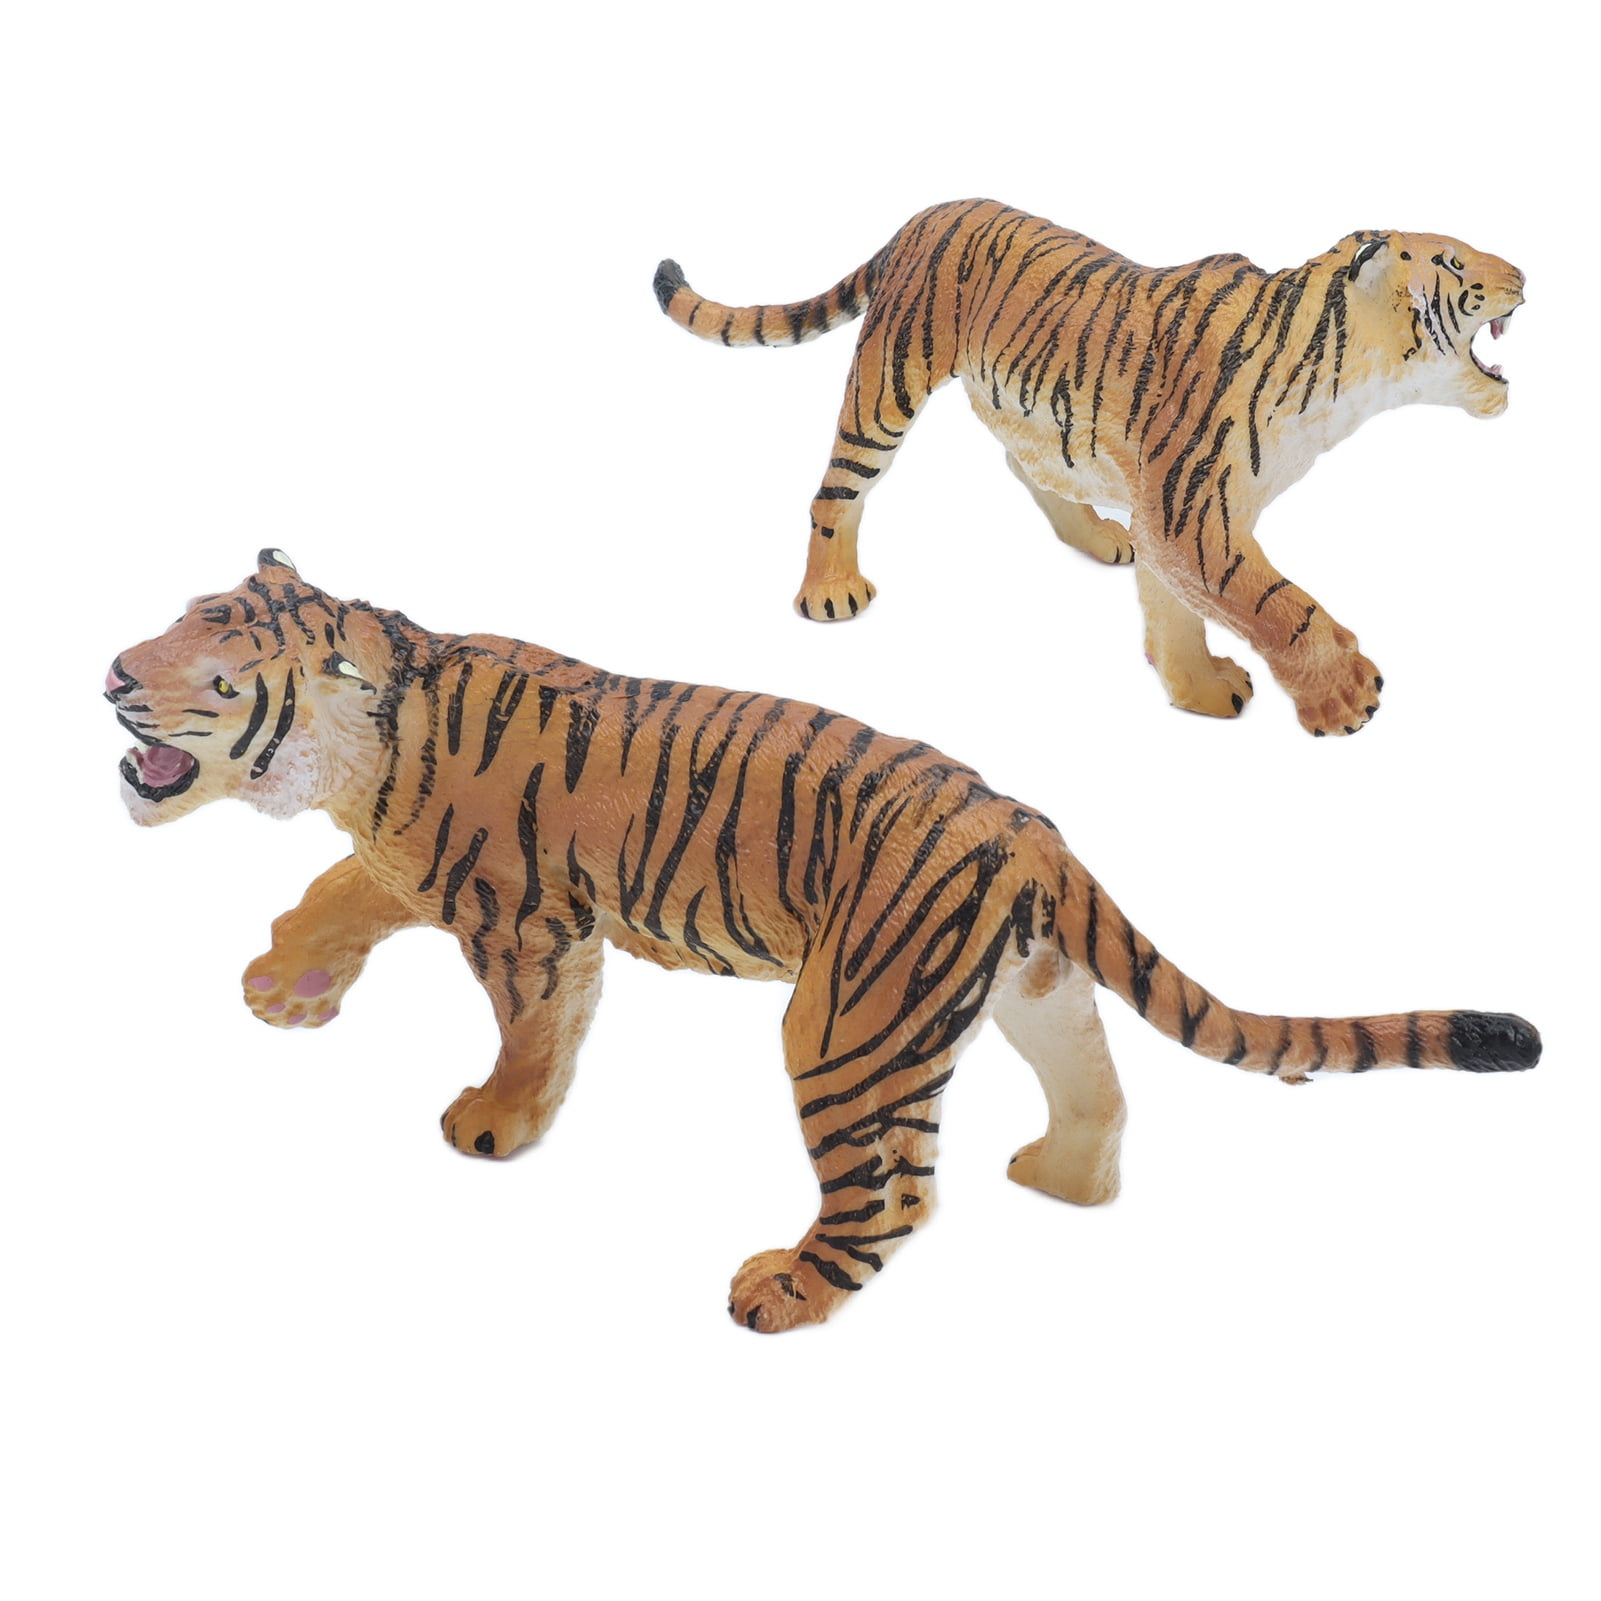 MOJO Wild Cats Collection Male Lion & Bengal Tiger Figurines 2pc New Ships Free! 